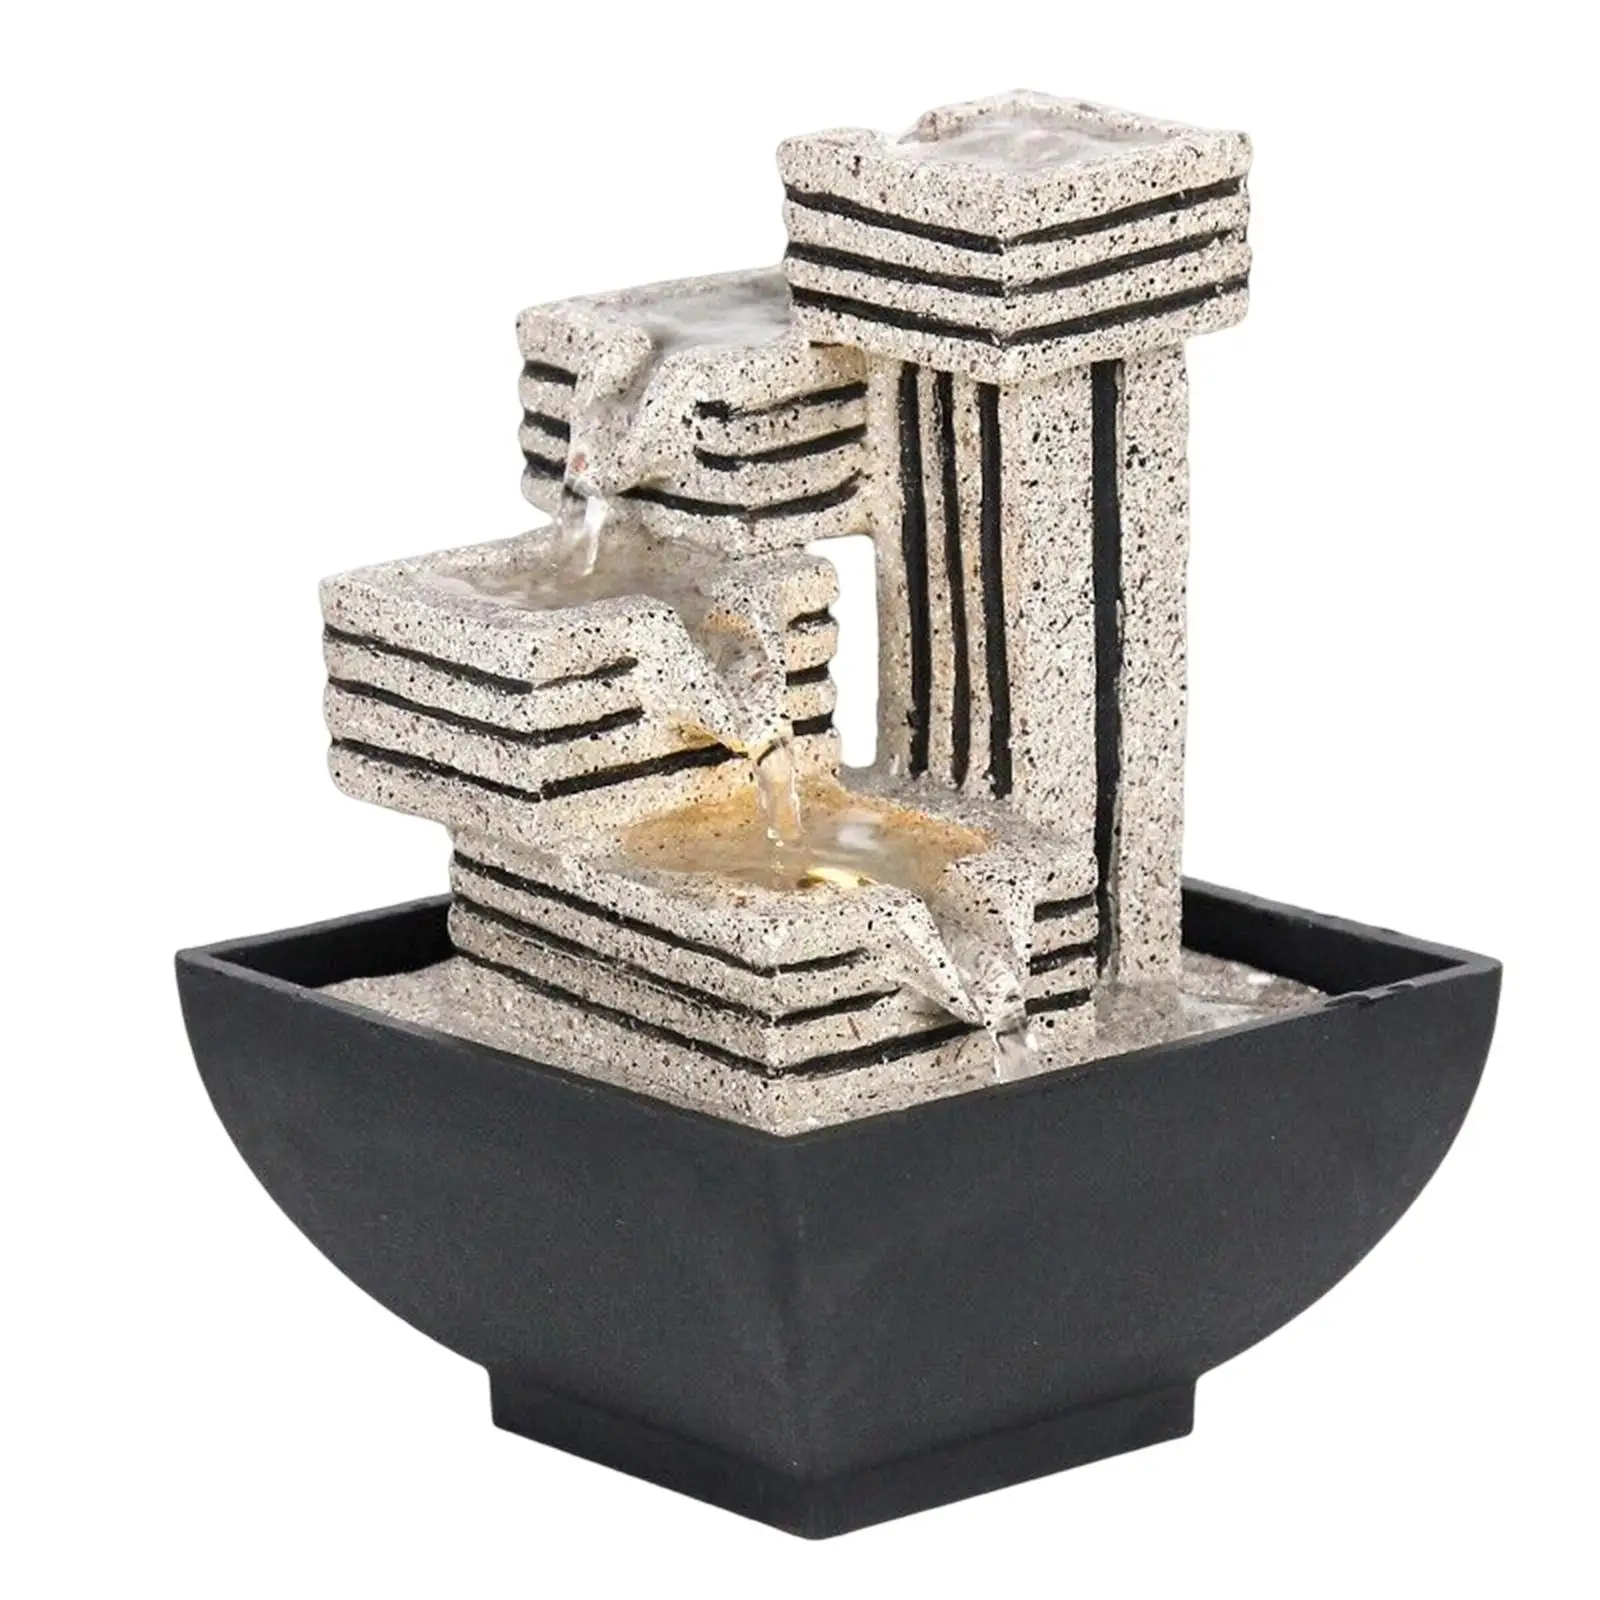 

4 Crafts Decoration Water Gifts Tabletop Fountain With Sound Water Calming Indoor Waterfall Lights Desk Tiers For Fountain